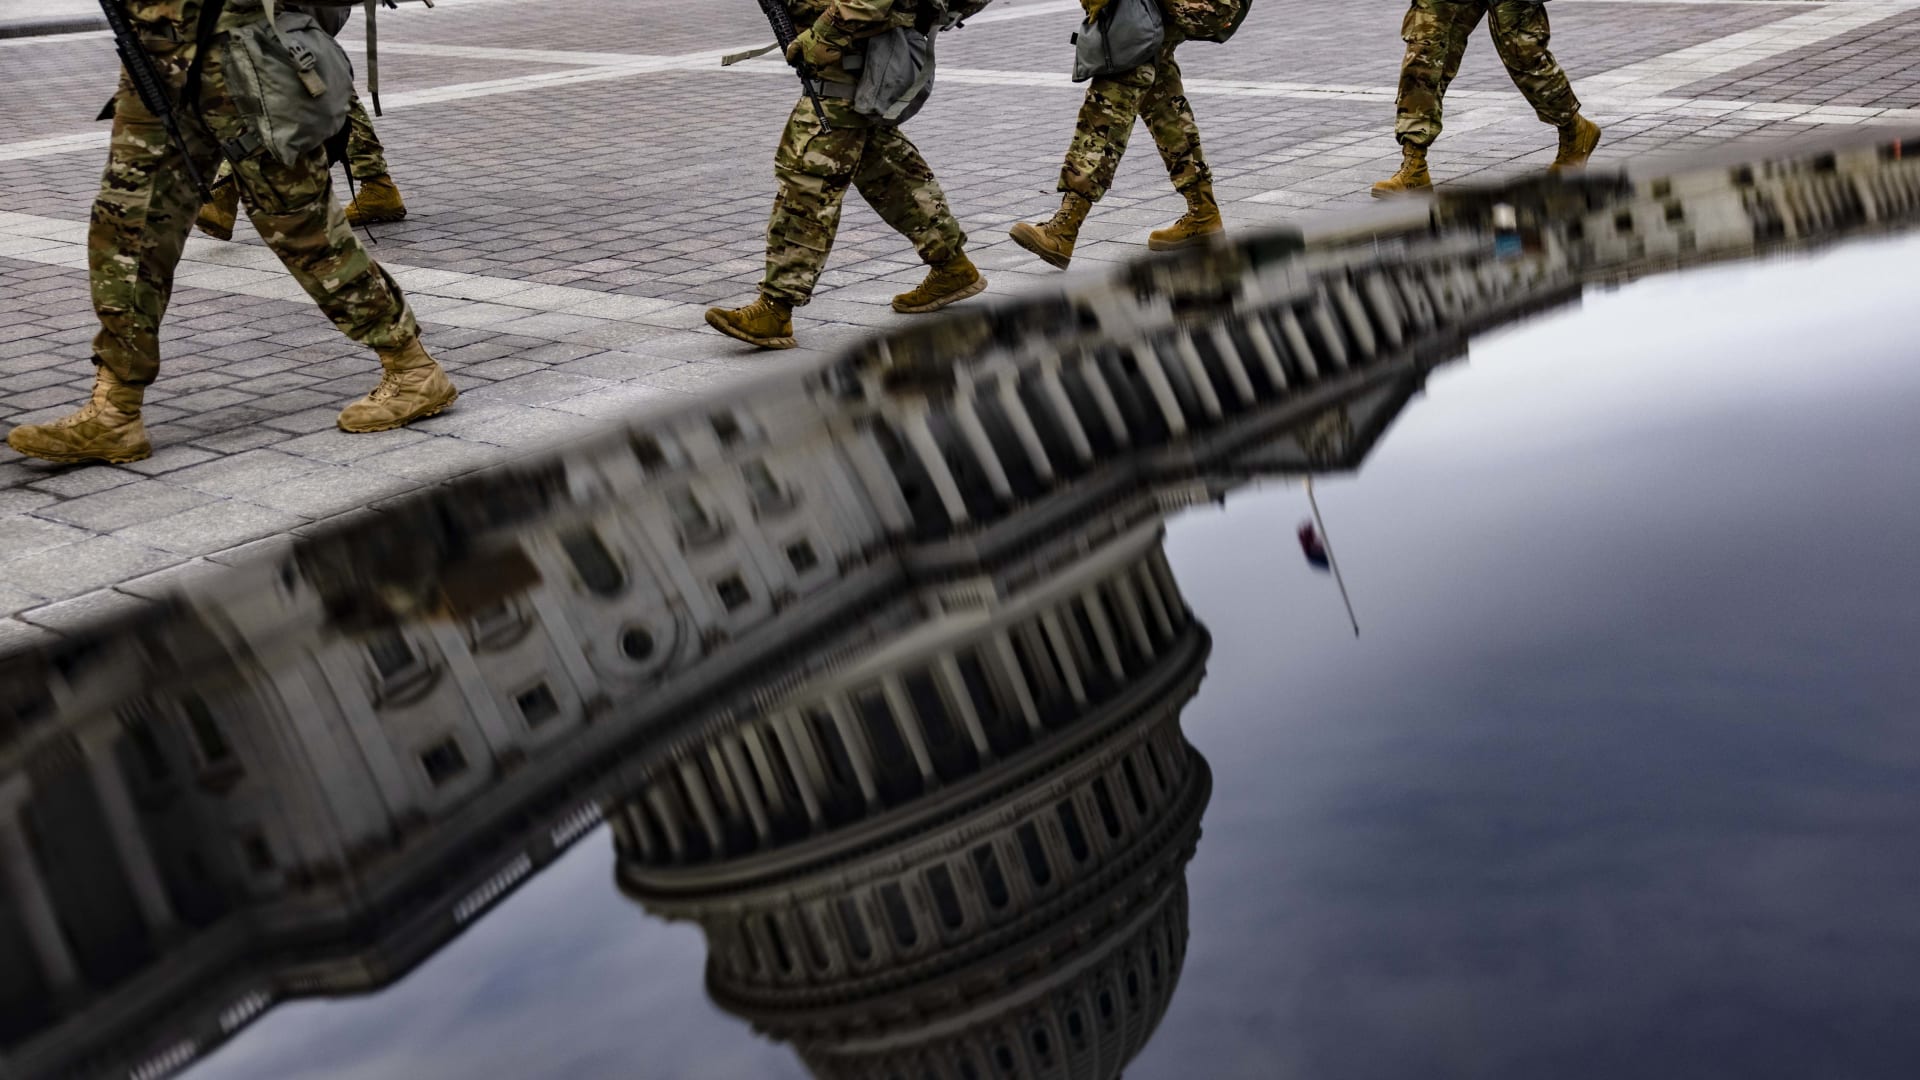 Virginia National Guard soldiers march at the U.S. Capitol on their way to their guard posts on January 16, 2021, in Washington, D.C. After last week's riots at the U.S. Capitol Building, the FBI has warned of additional threats in the nation's capital and in all 50 states. According to reports, as many as 25,000 National Guard soldiers will be guarding the city as preparations are made for the inauguration of Joe Biden as the 46th U.S. president.